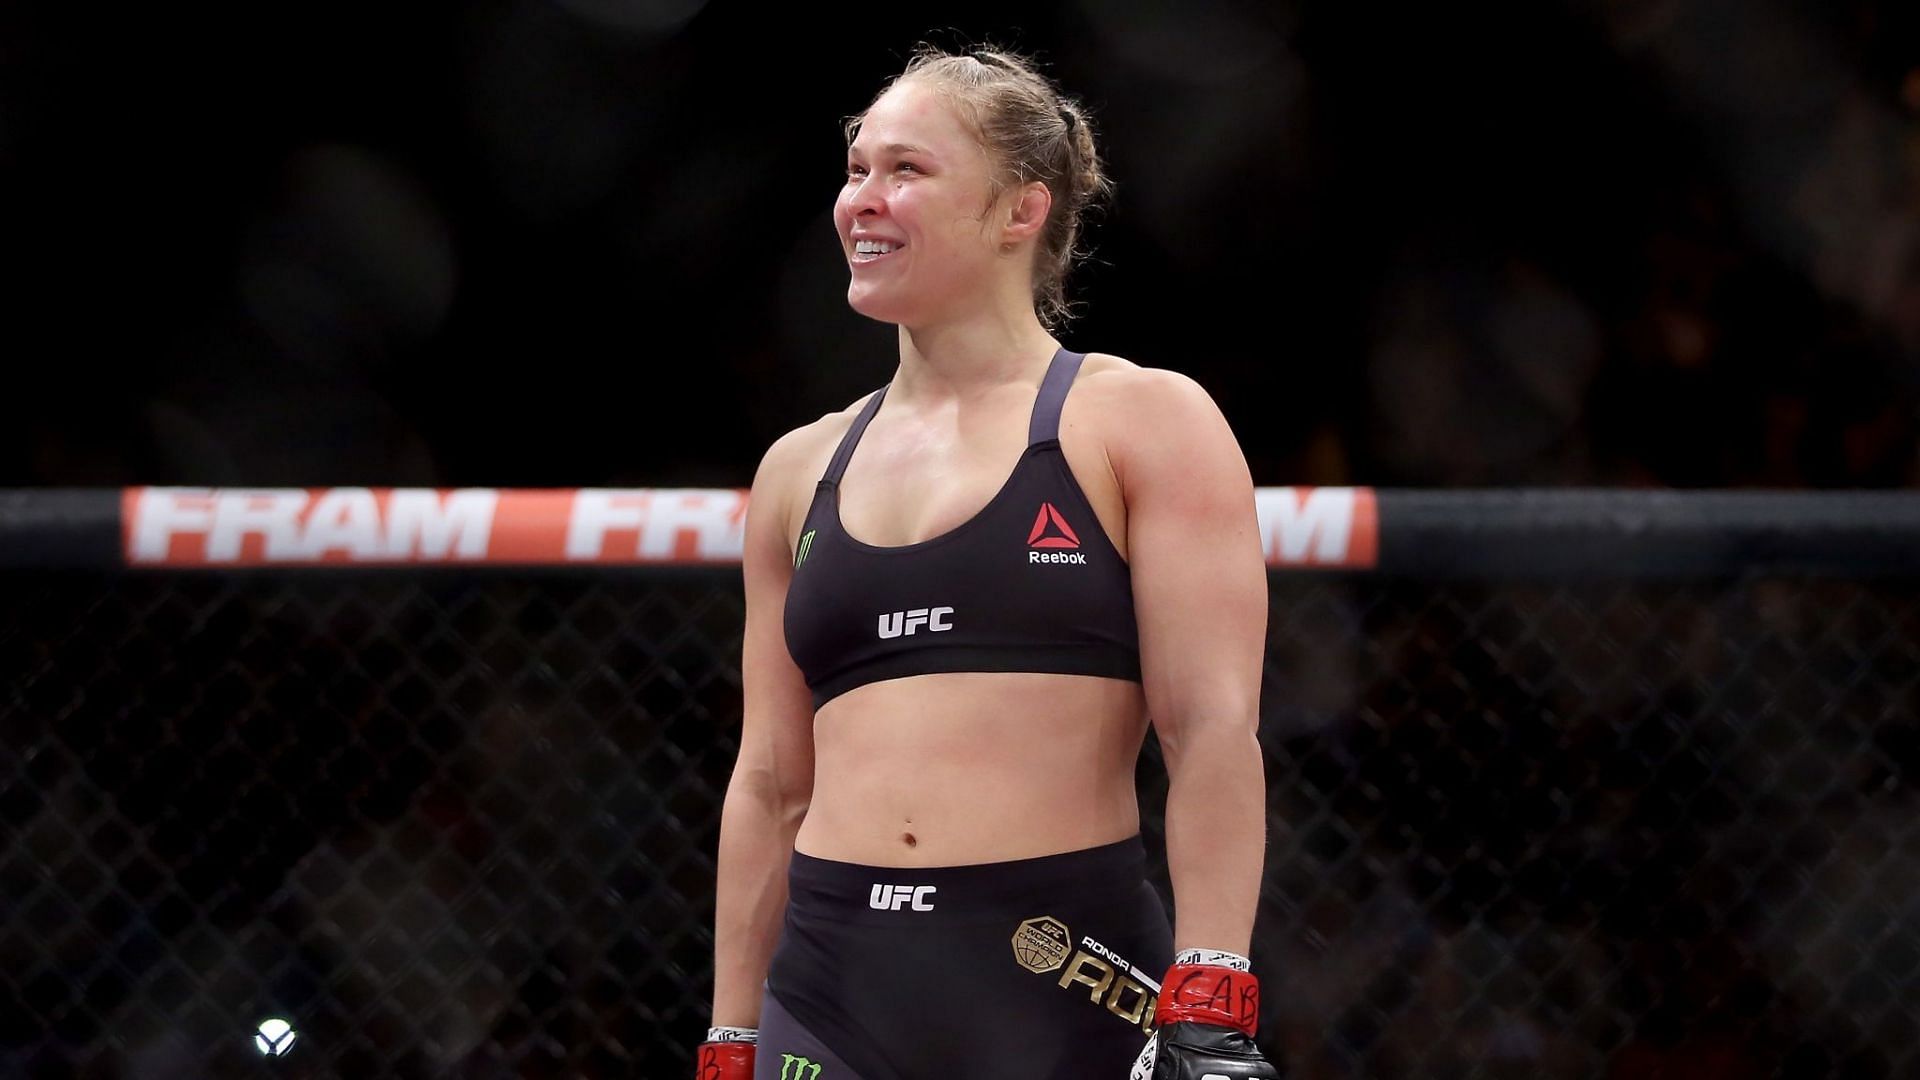 In hindsight, Ronda Rousey should never have embraced striking in the way she did